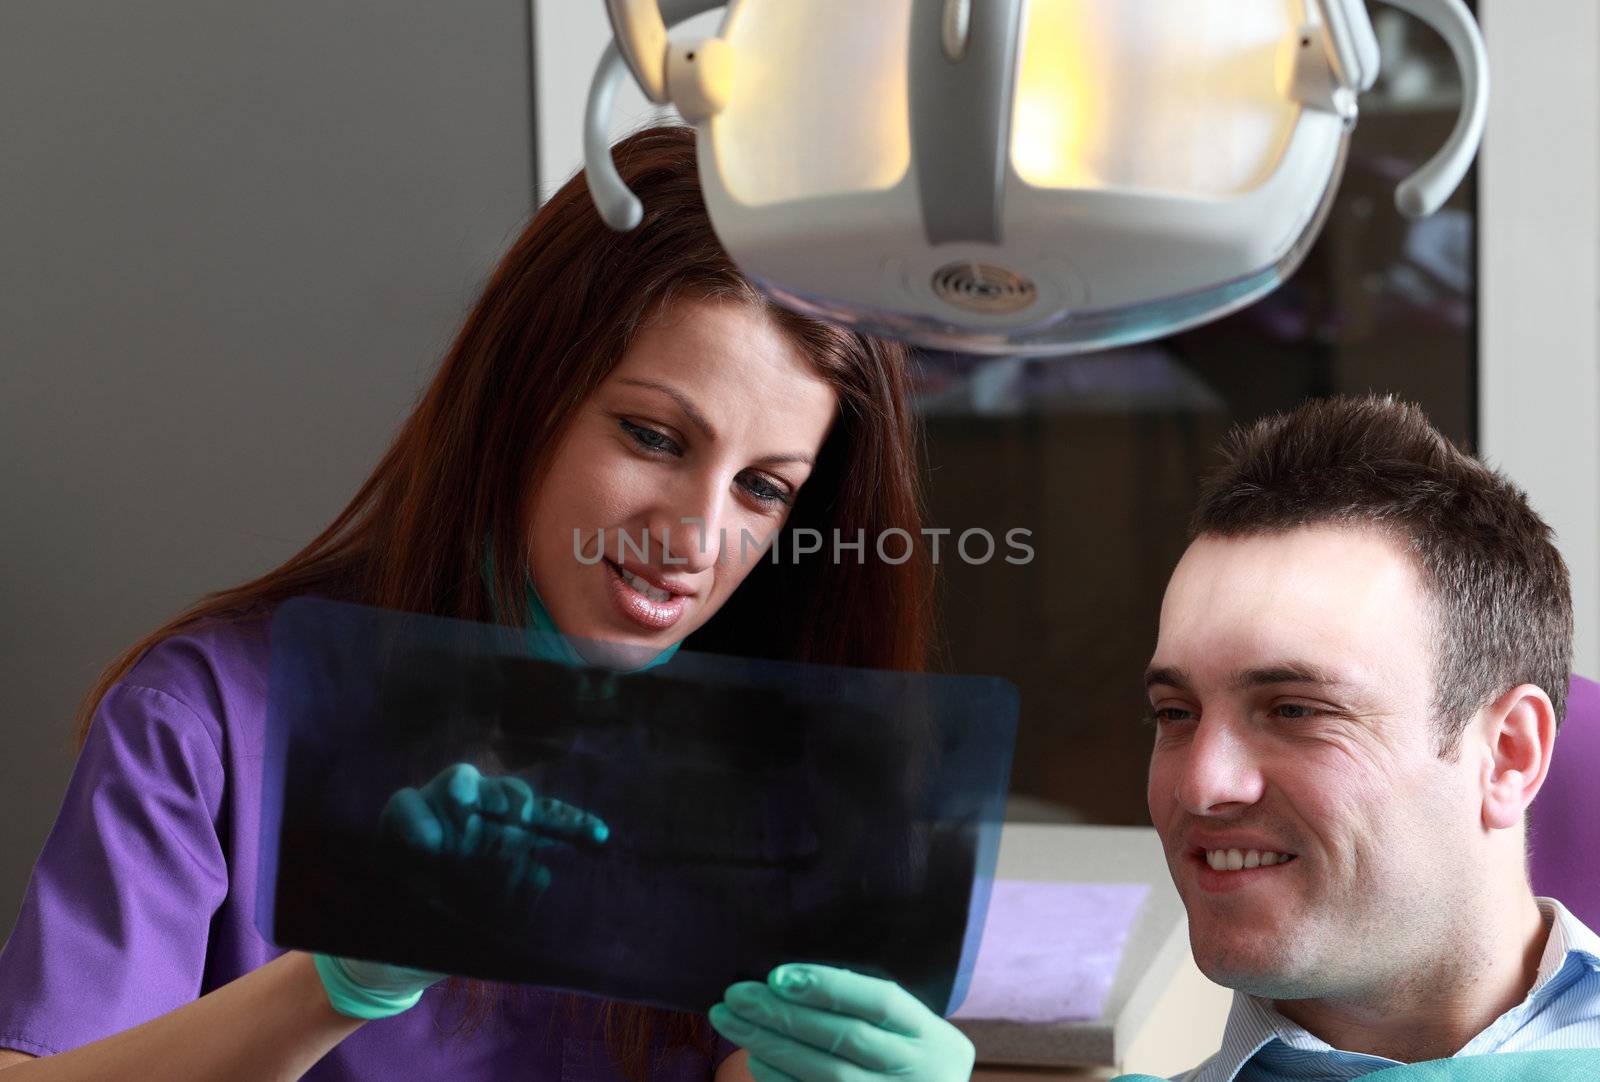 At the dentist by RazvanPhotography